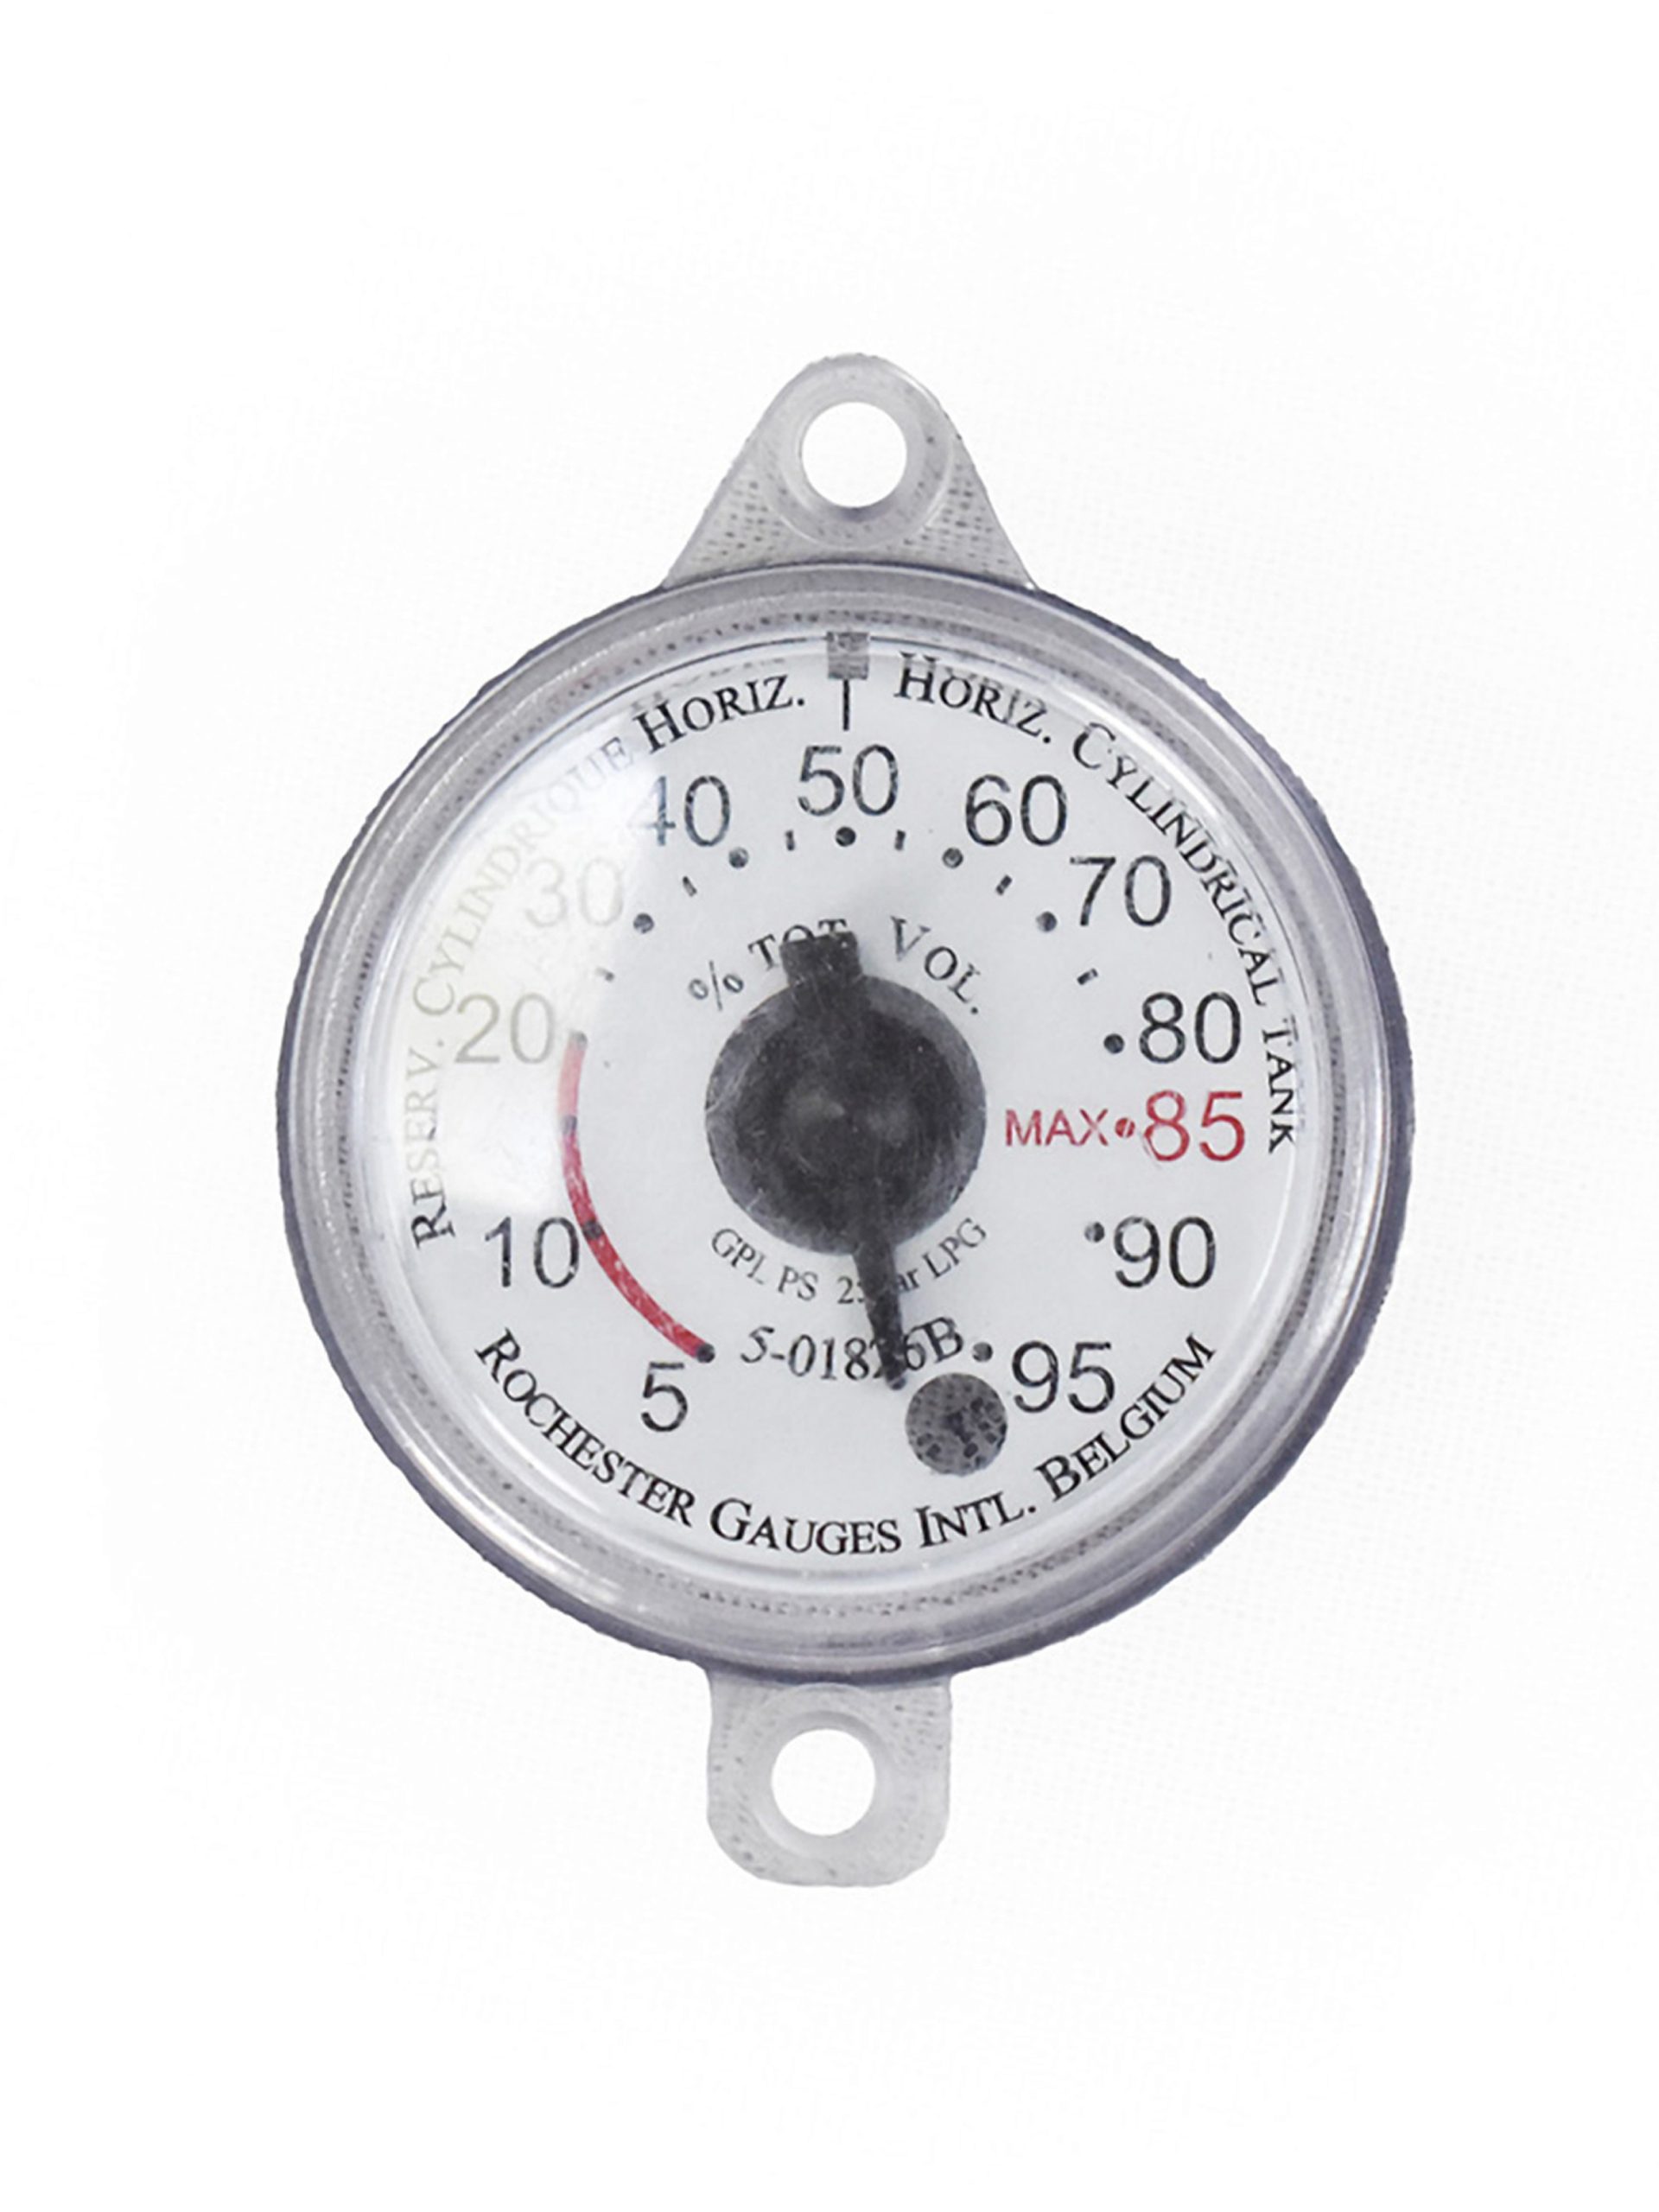 DIAL FOR ROCHESTER LEVEL GAUGE from Gas Equipment Company Llc Abu Dhabi, UNITED ARAB EMIRATES